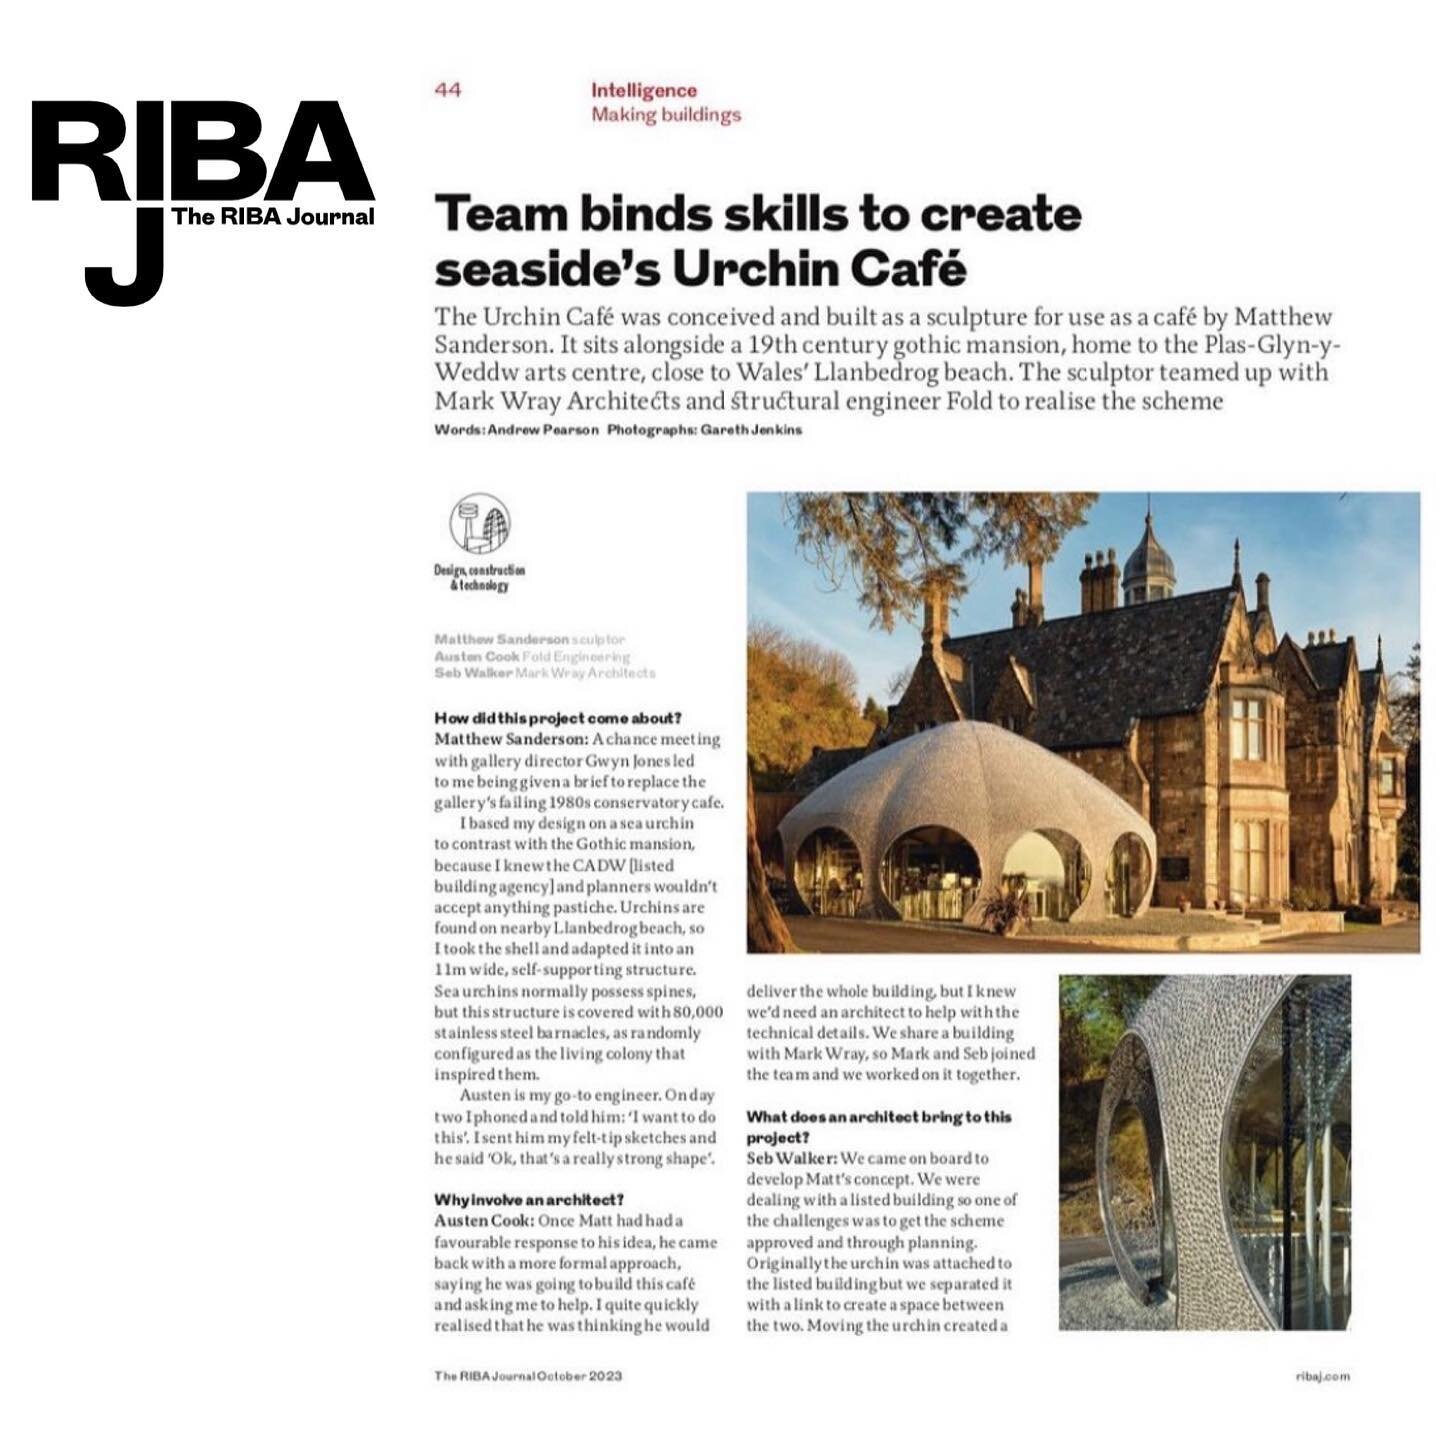 The cafe at Plas Glyn y Weddw is featured in the current RIBA Journal, with an interview with @sandersonsculpture , @markwrayarch and ourselves explaining how we got there.

https://www.ribaj.com/intelligence/urchin-cafe-llanbedrog-beach-wales-arts-c